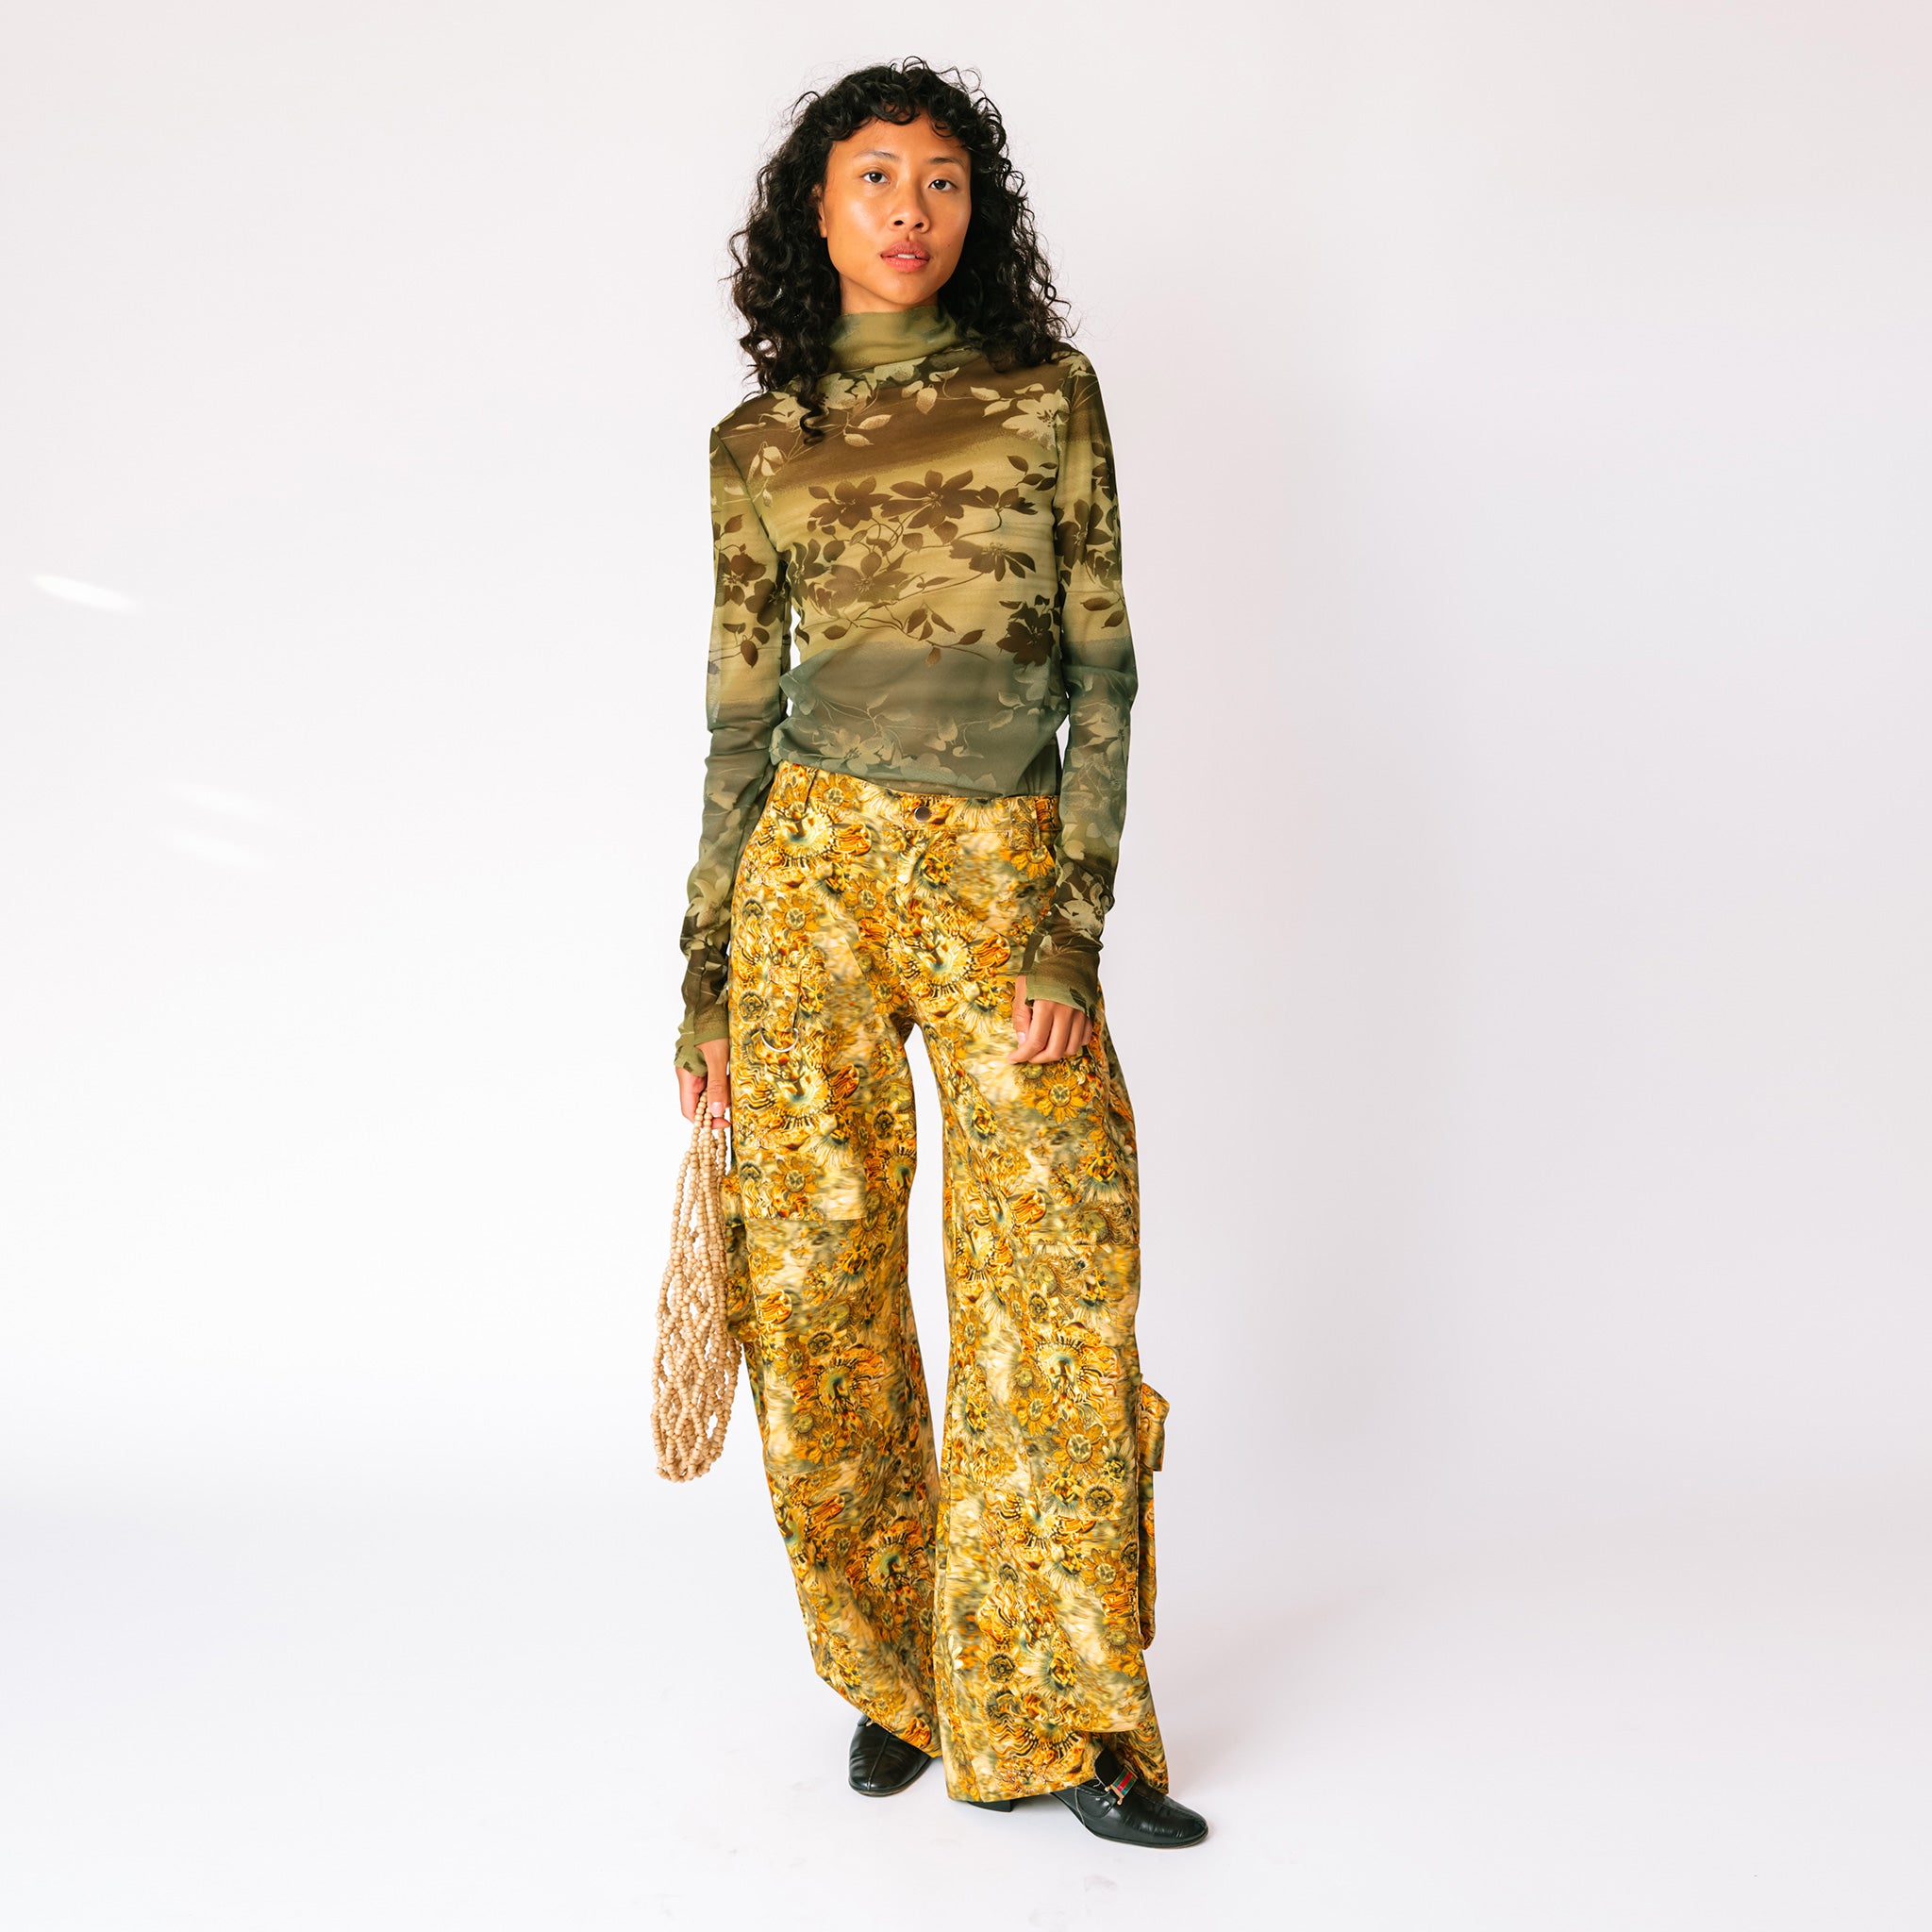 A model wears the brown and yellow floral printed Lawn Cargo Pants by Collina Strada with a mesh green long sleeved top.